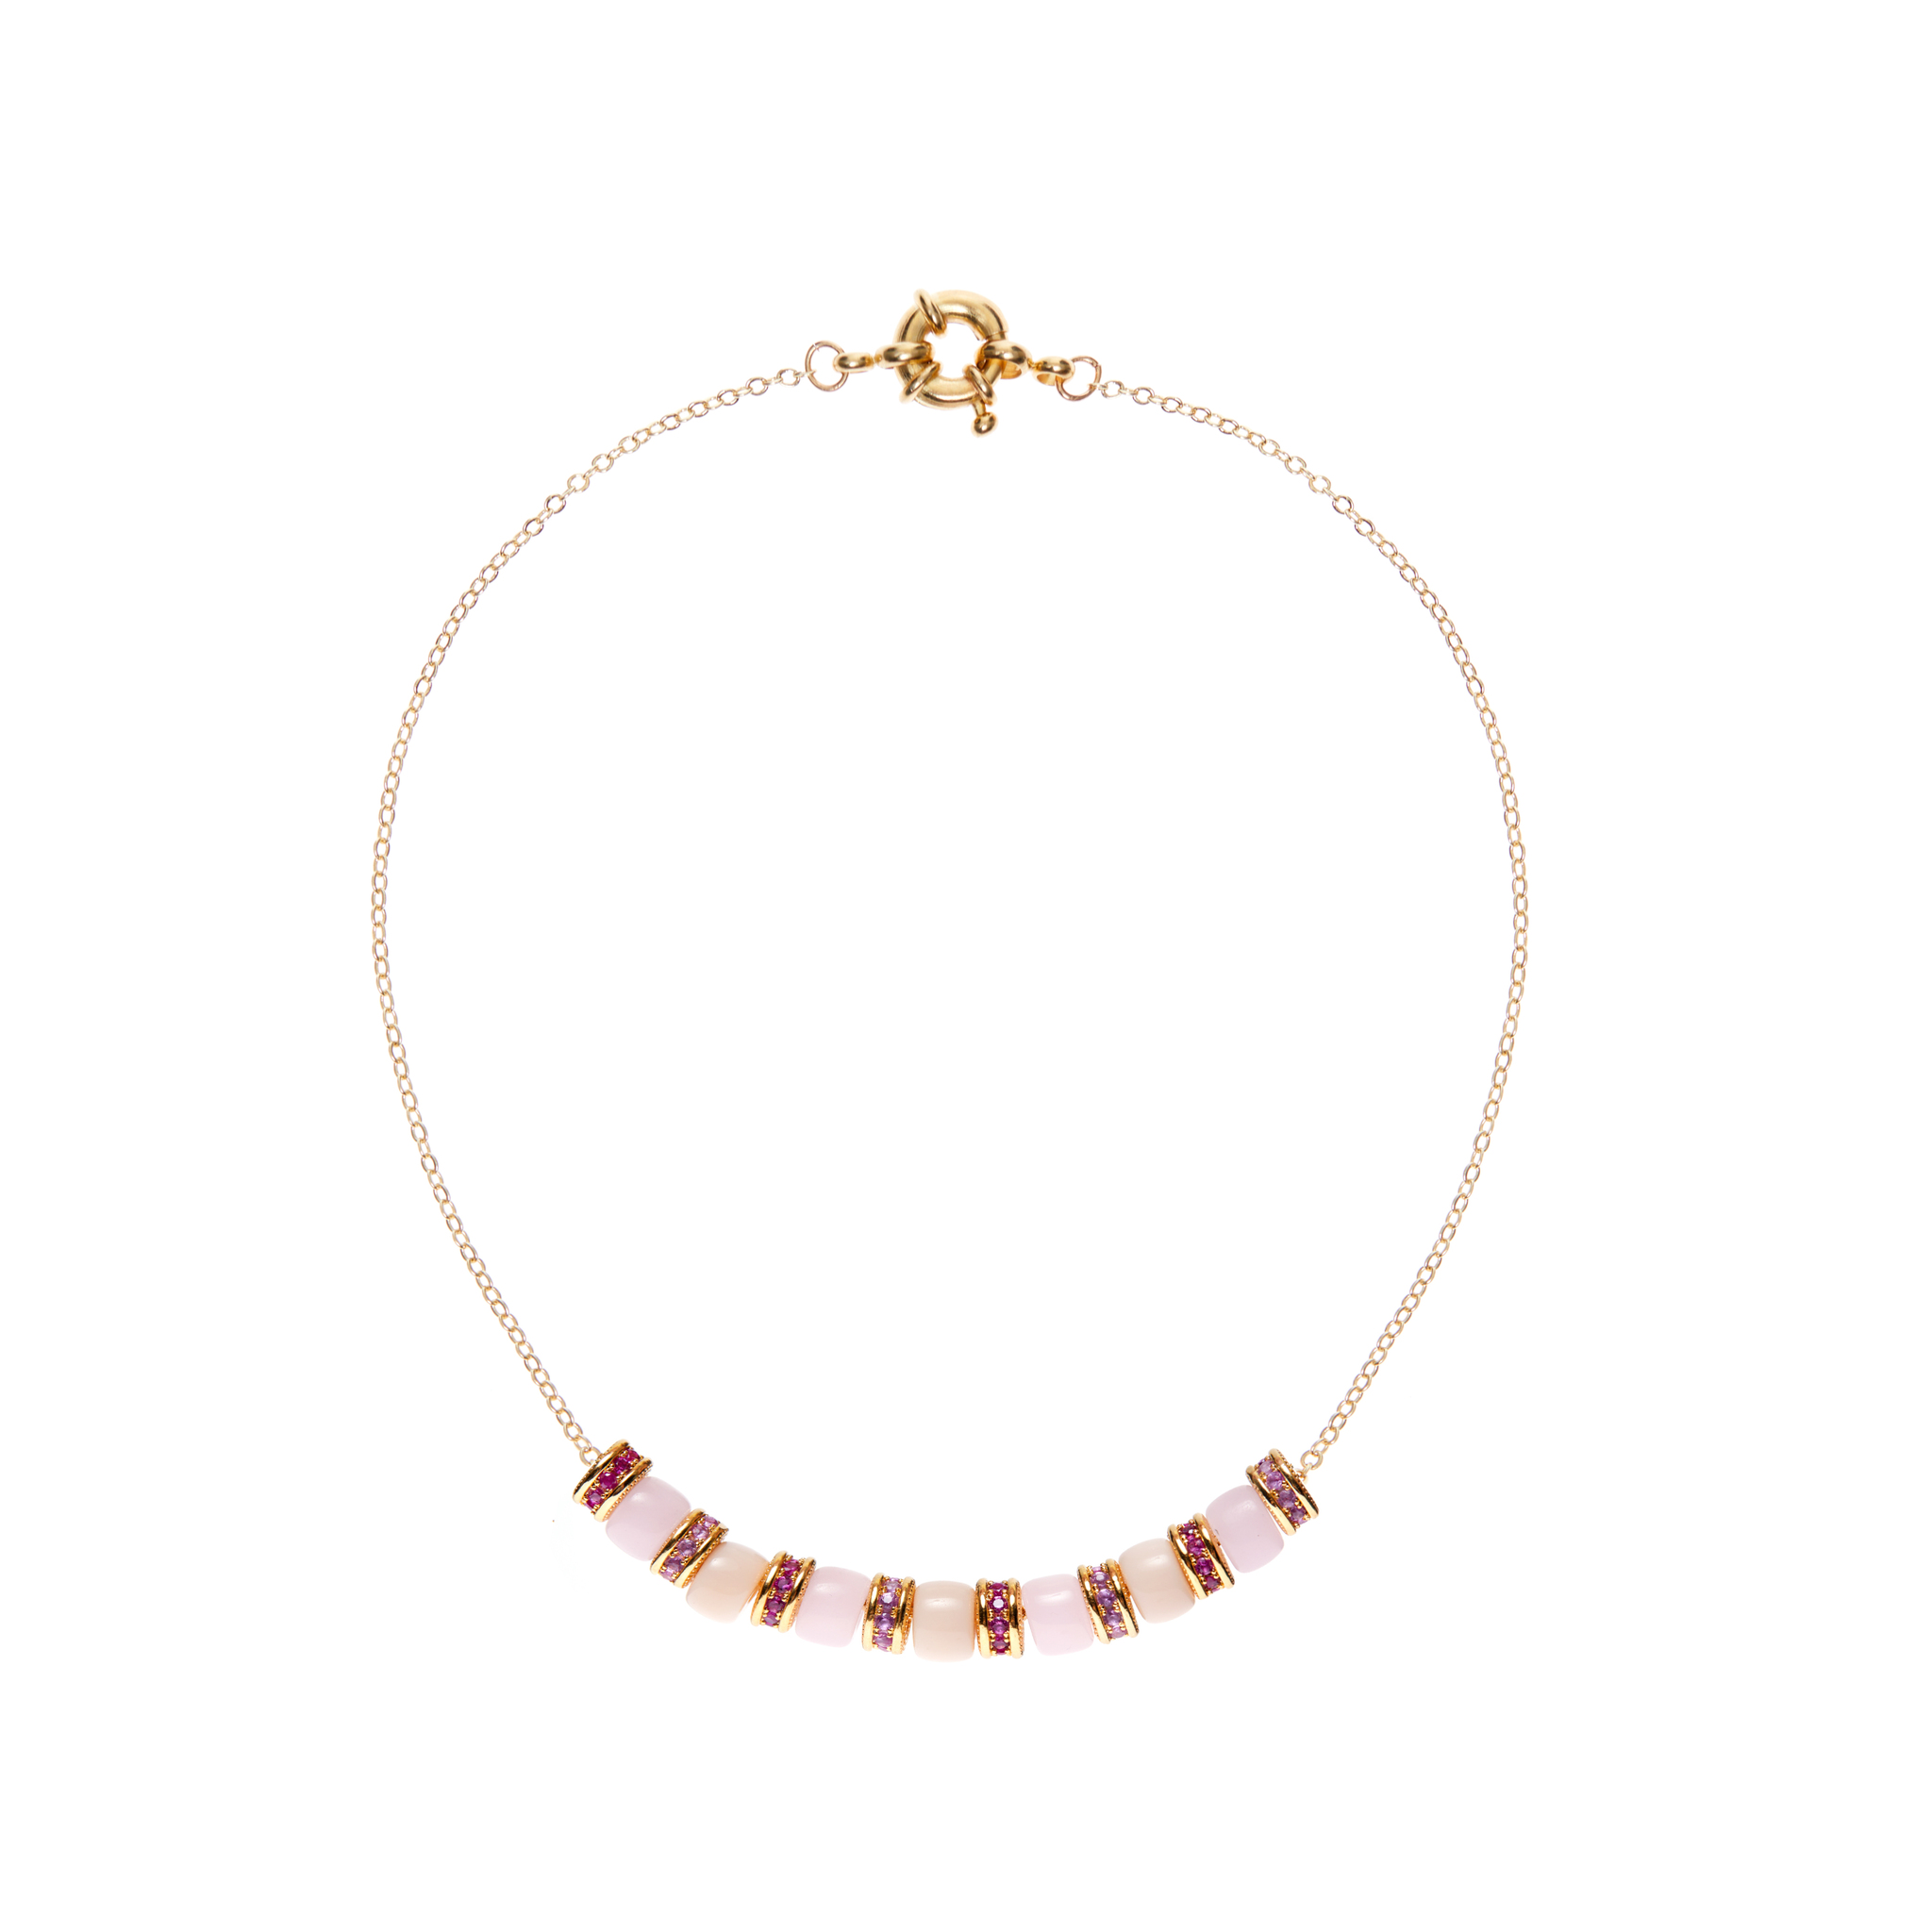 HOLLY JUNE Колье Beads Necklace – Pink holly june колье beads and gold heart necklace